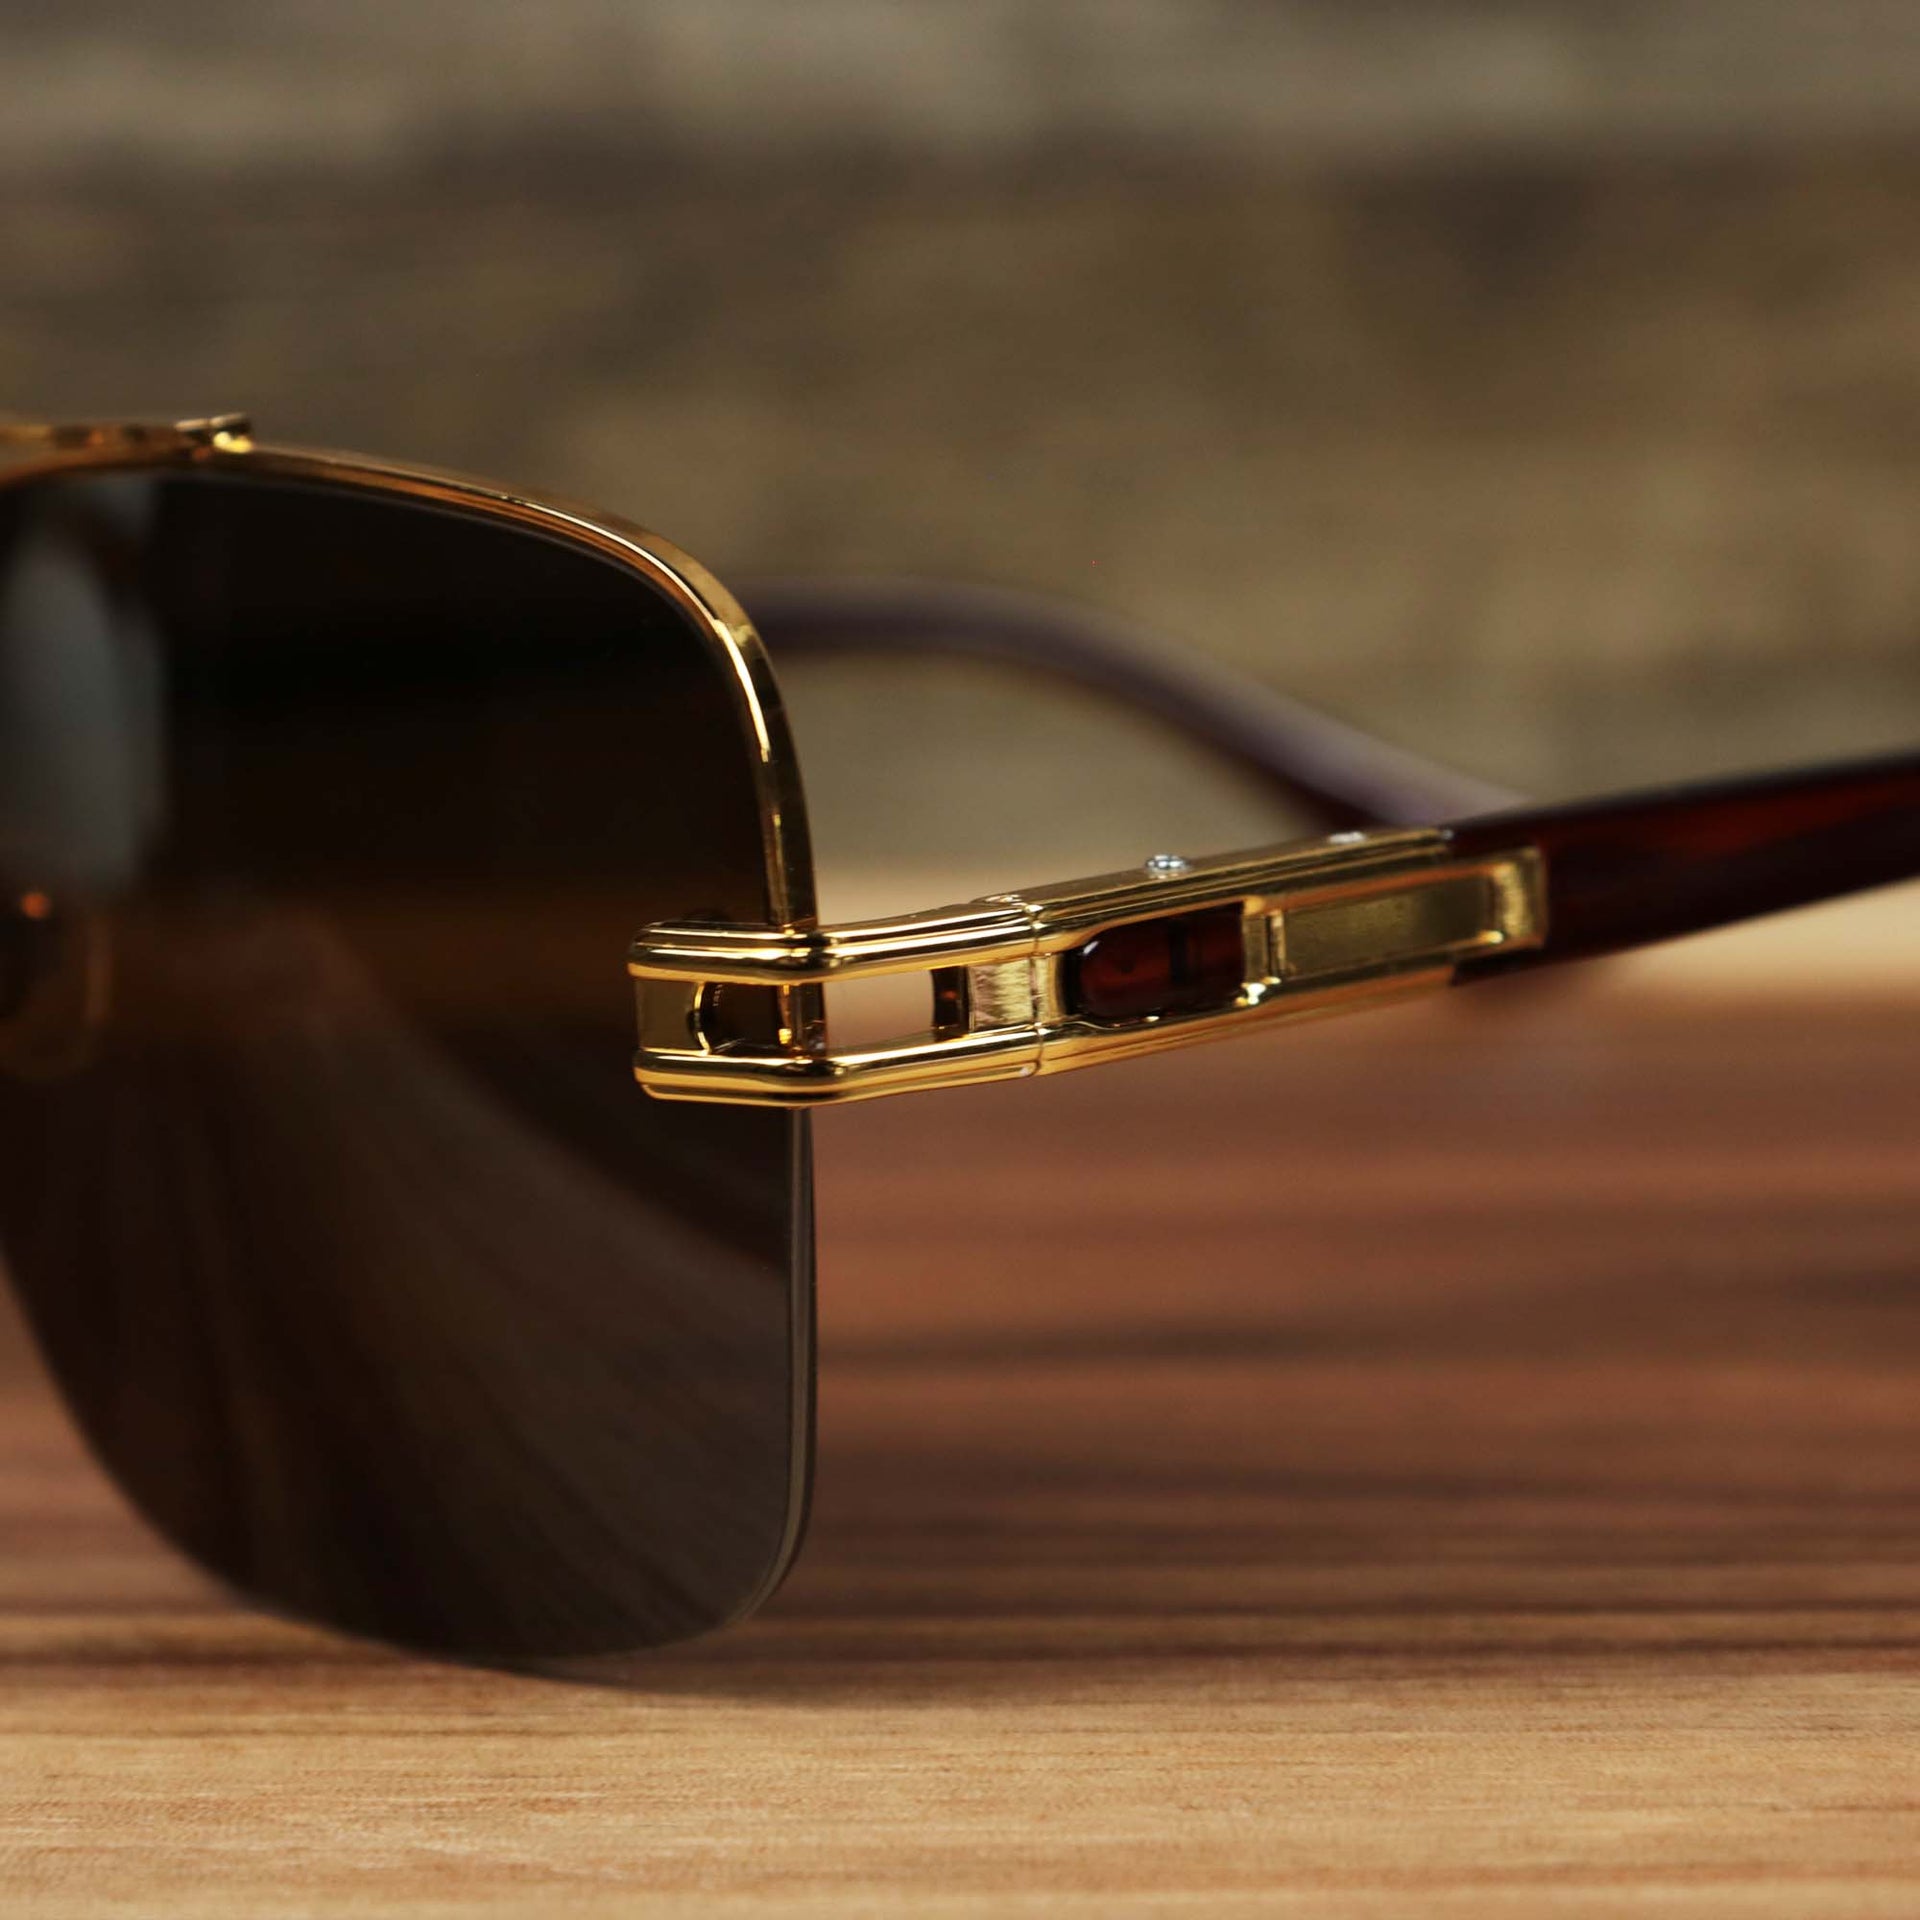 The hinge on the Round Rectangle Frame Brown Lens Sunglasses with Gold Frame